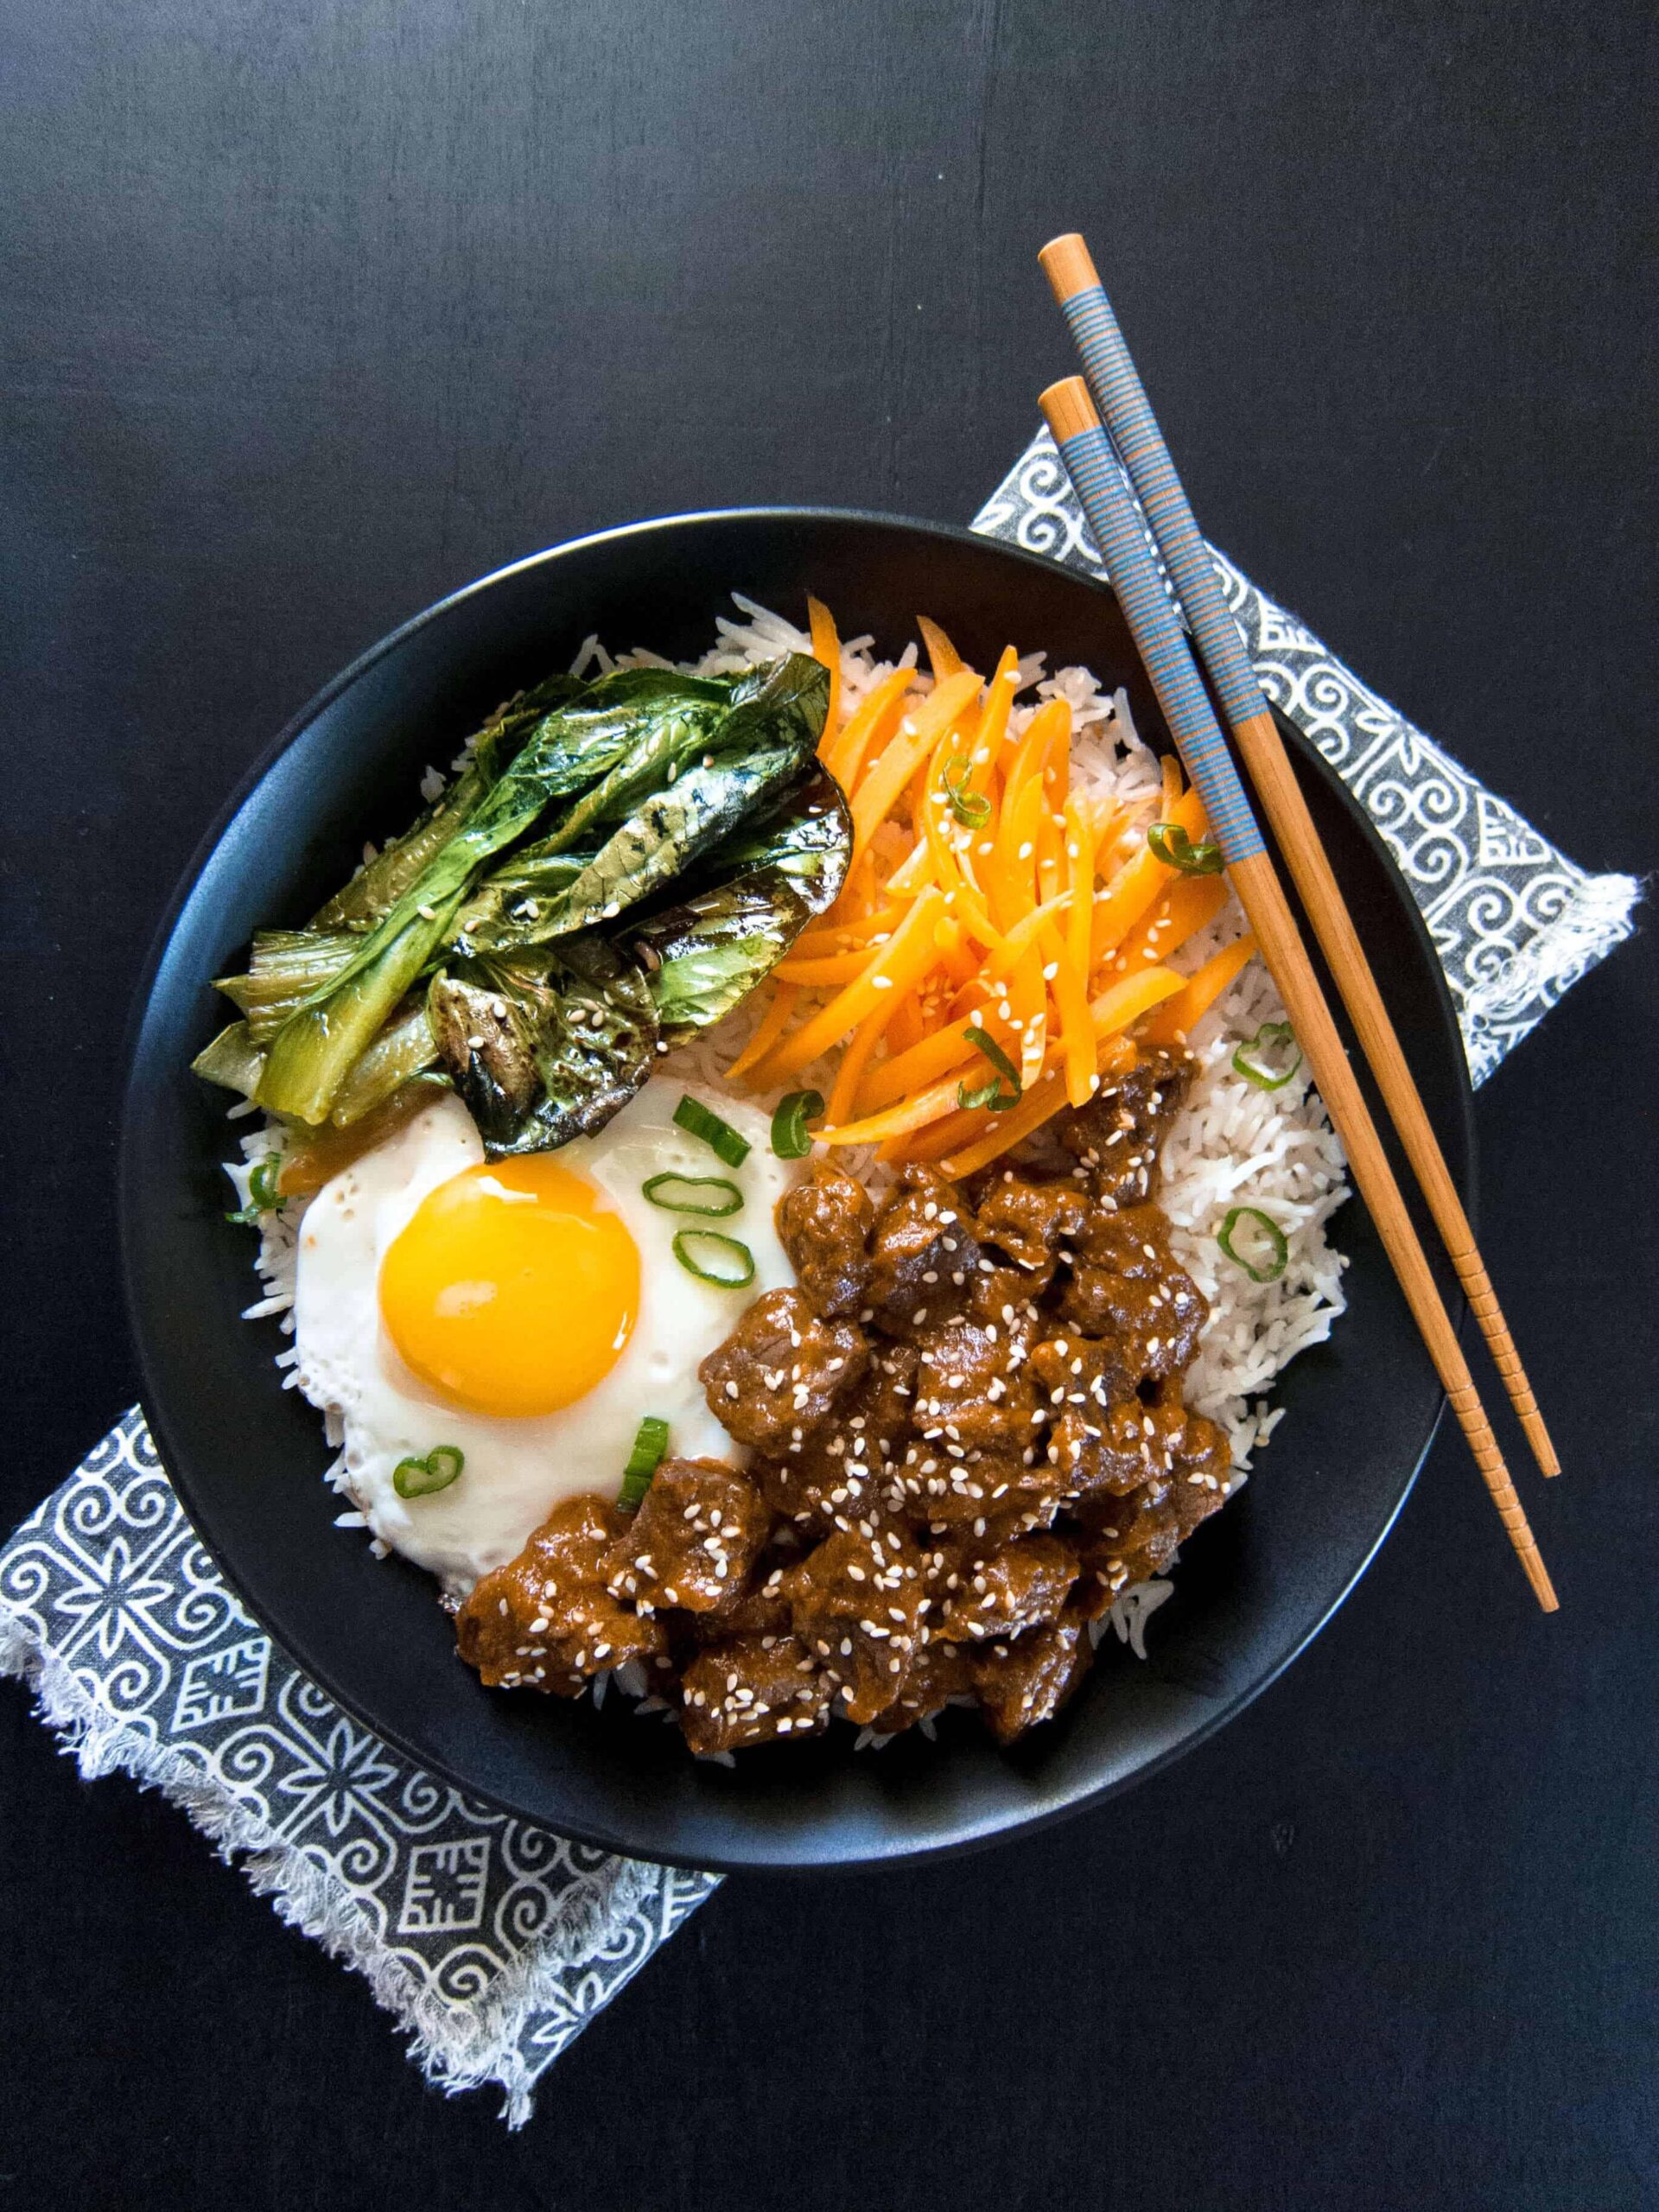  I'm excited to share with you my favorite bibimbap recipe that packs a flavor punch.